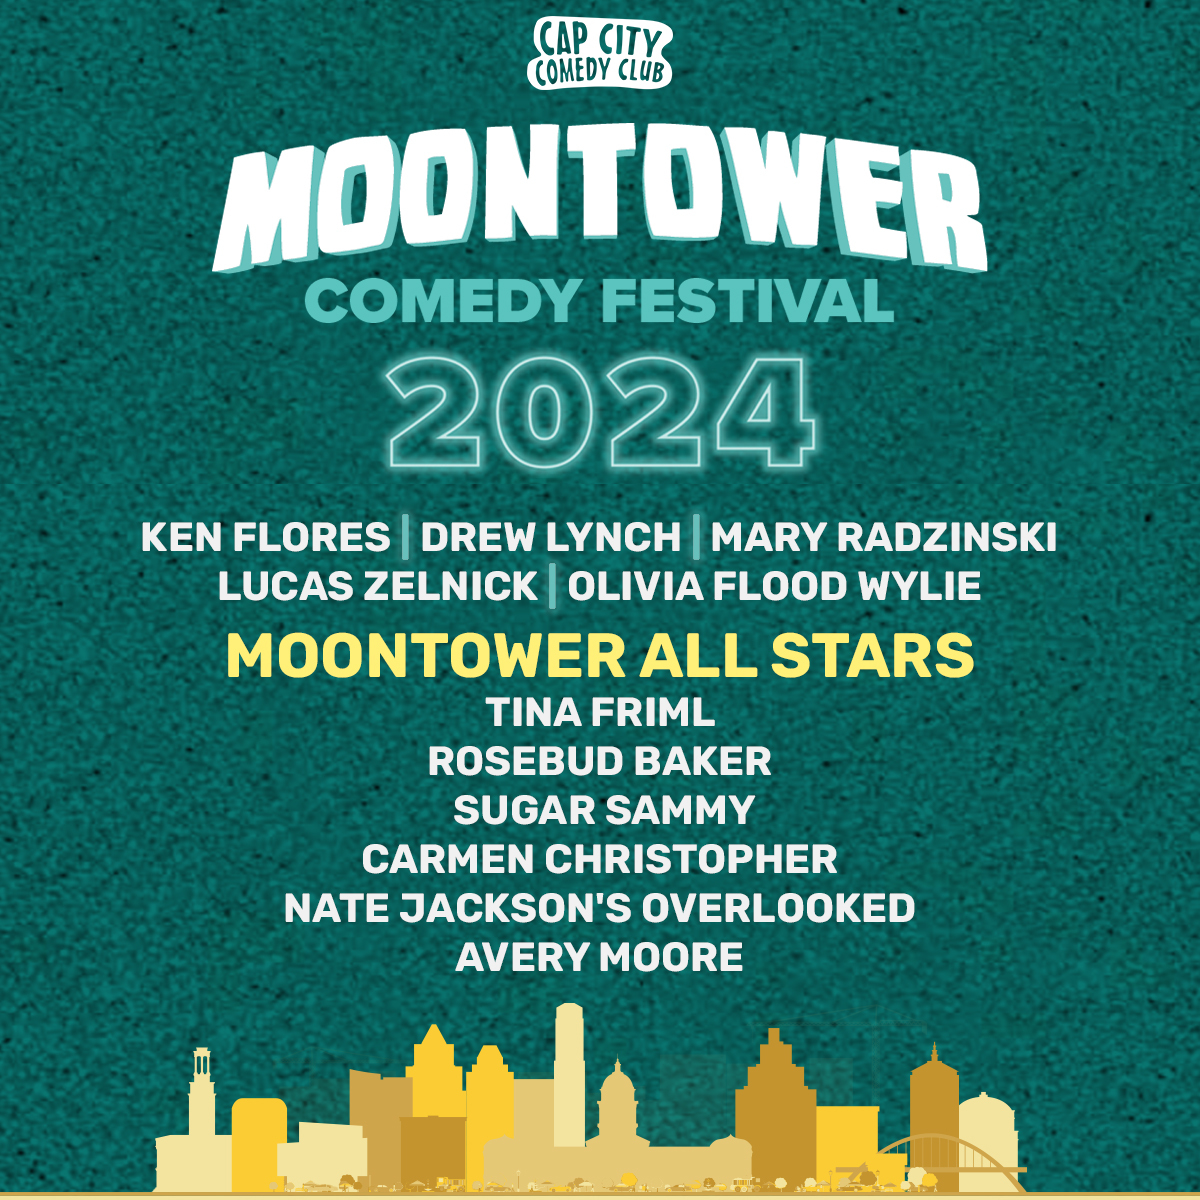 This Week at Cap City | Moontower Comedy Festival comes to the club with some of your comedy favorites! Grab tickets now: bit.ly/3hTxS3n